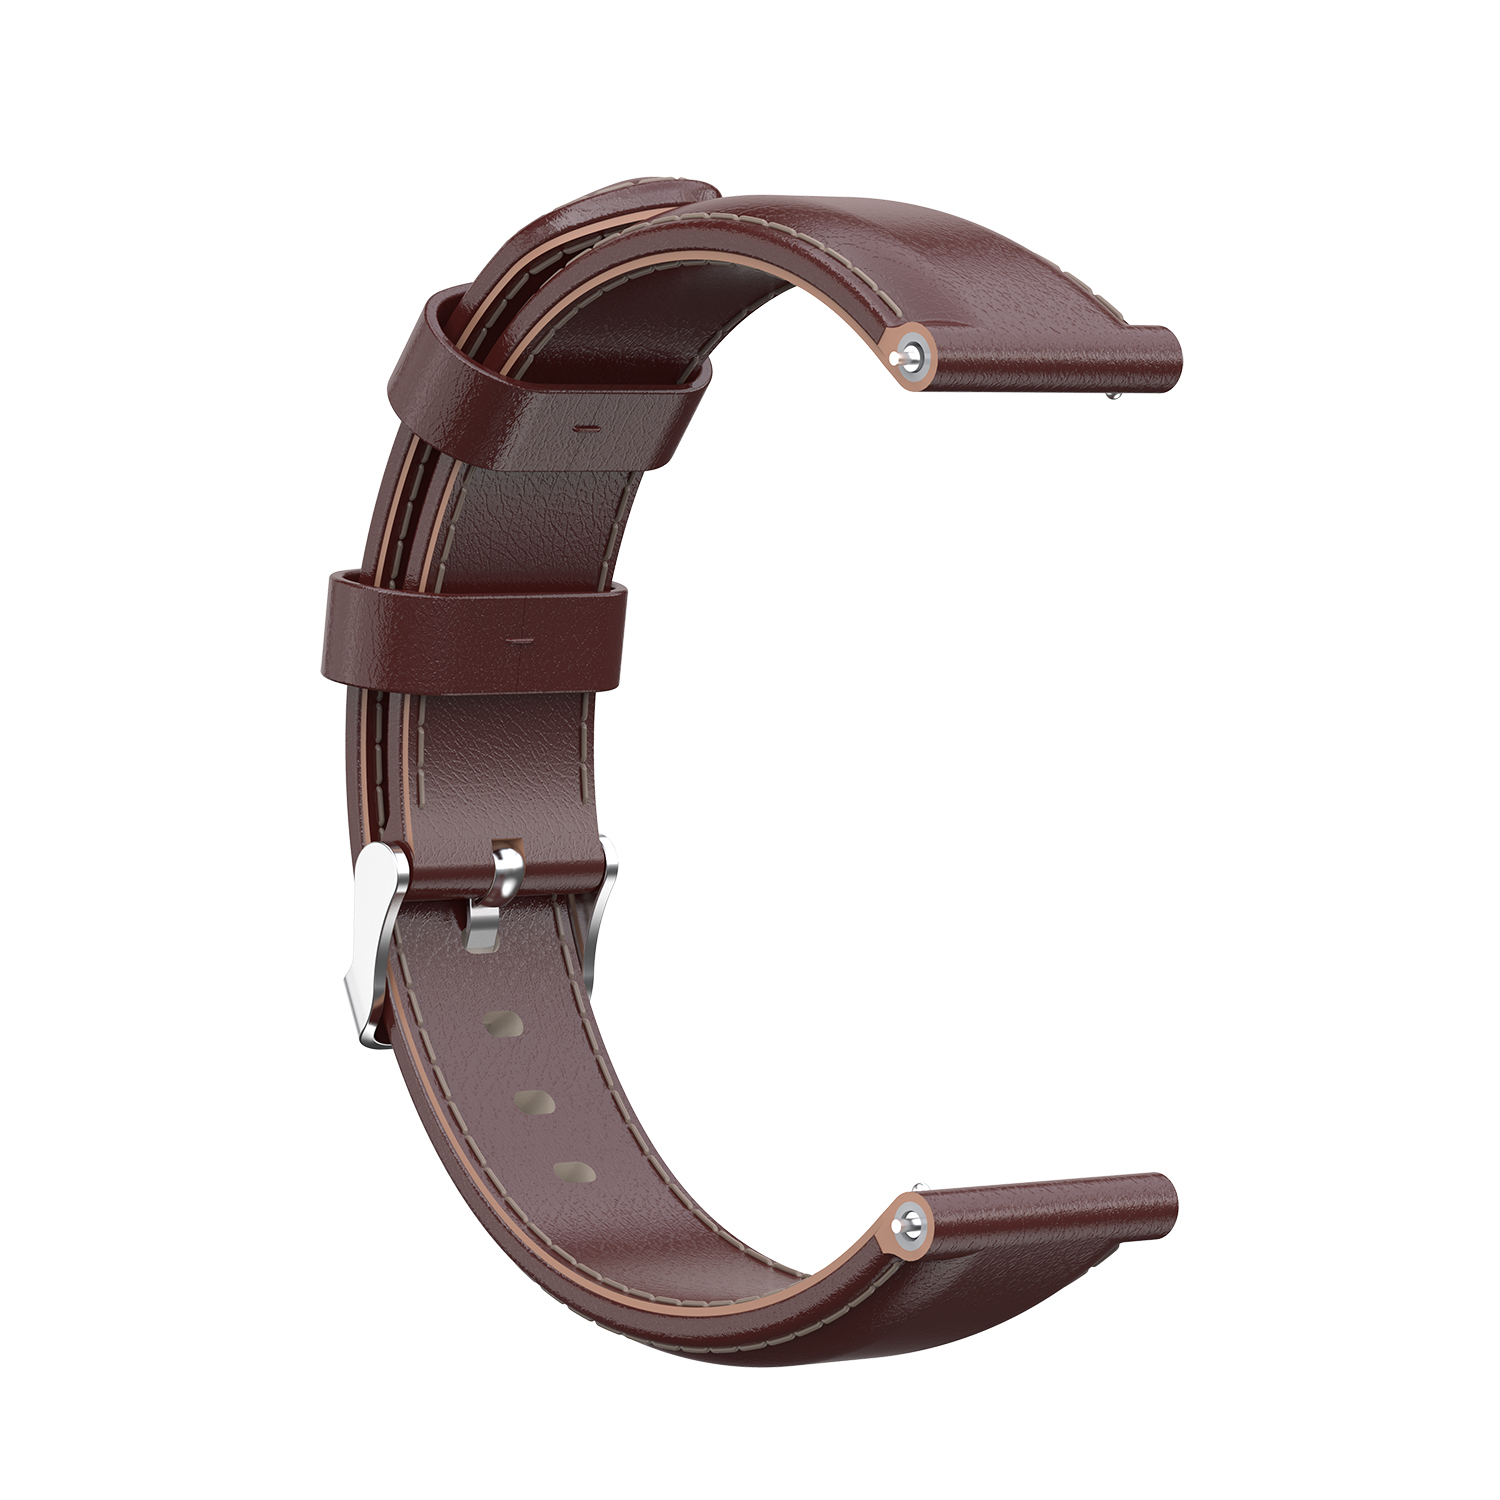 Bakeey-22mm-Genuine-Leather-Replacement-Strap-Smart-Watch-Band-For-Amazfit-GTR-47MM-1786519-23